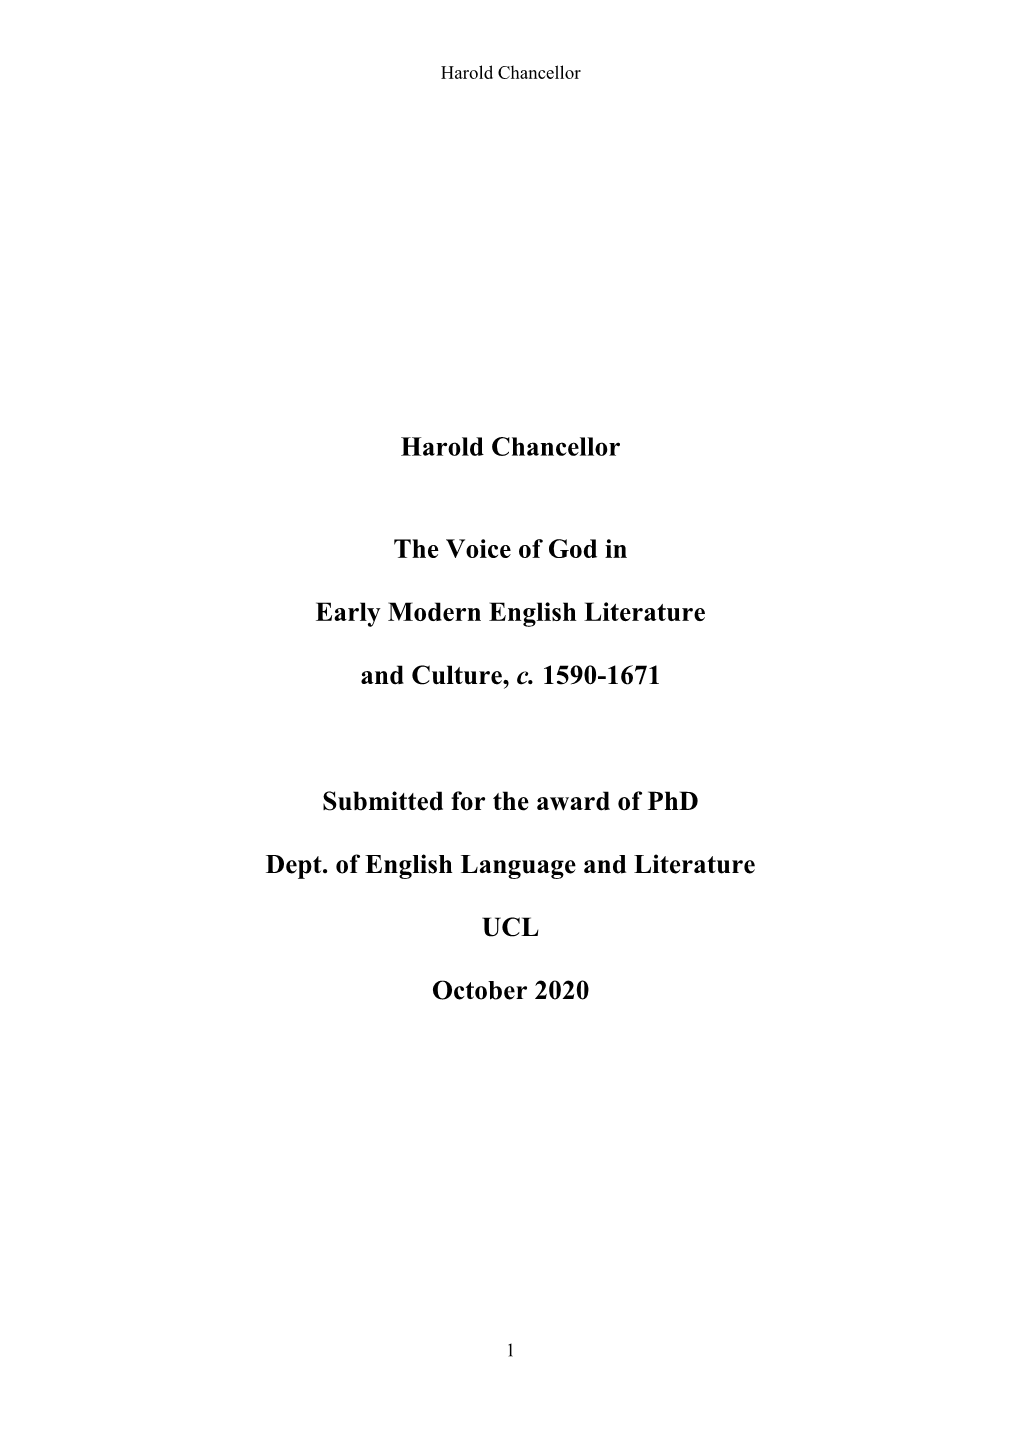 Harold Chancellor the Voice of God in Early Modern English Literature